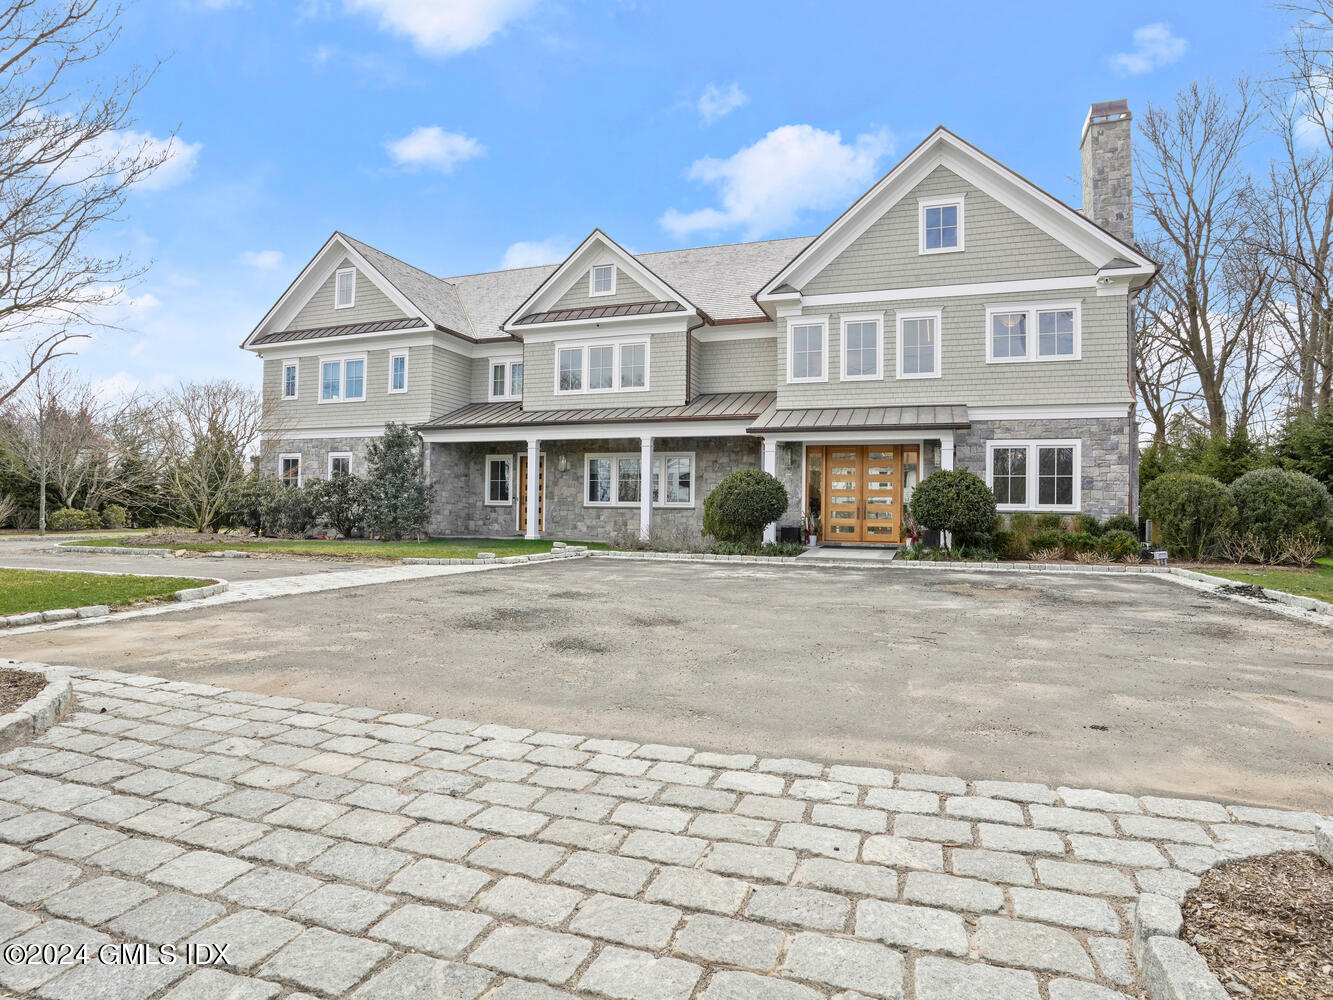 12 Turner Drive, Greenwich, Connecticut - 6 Bedrooms  
9 Bathrooms - 